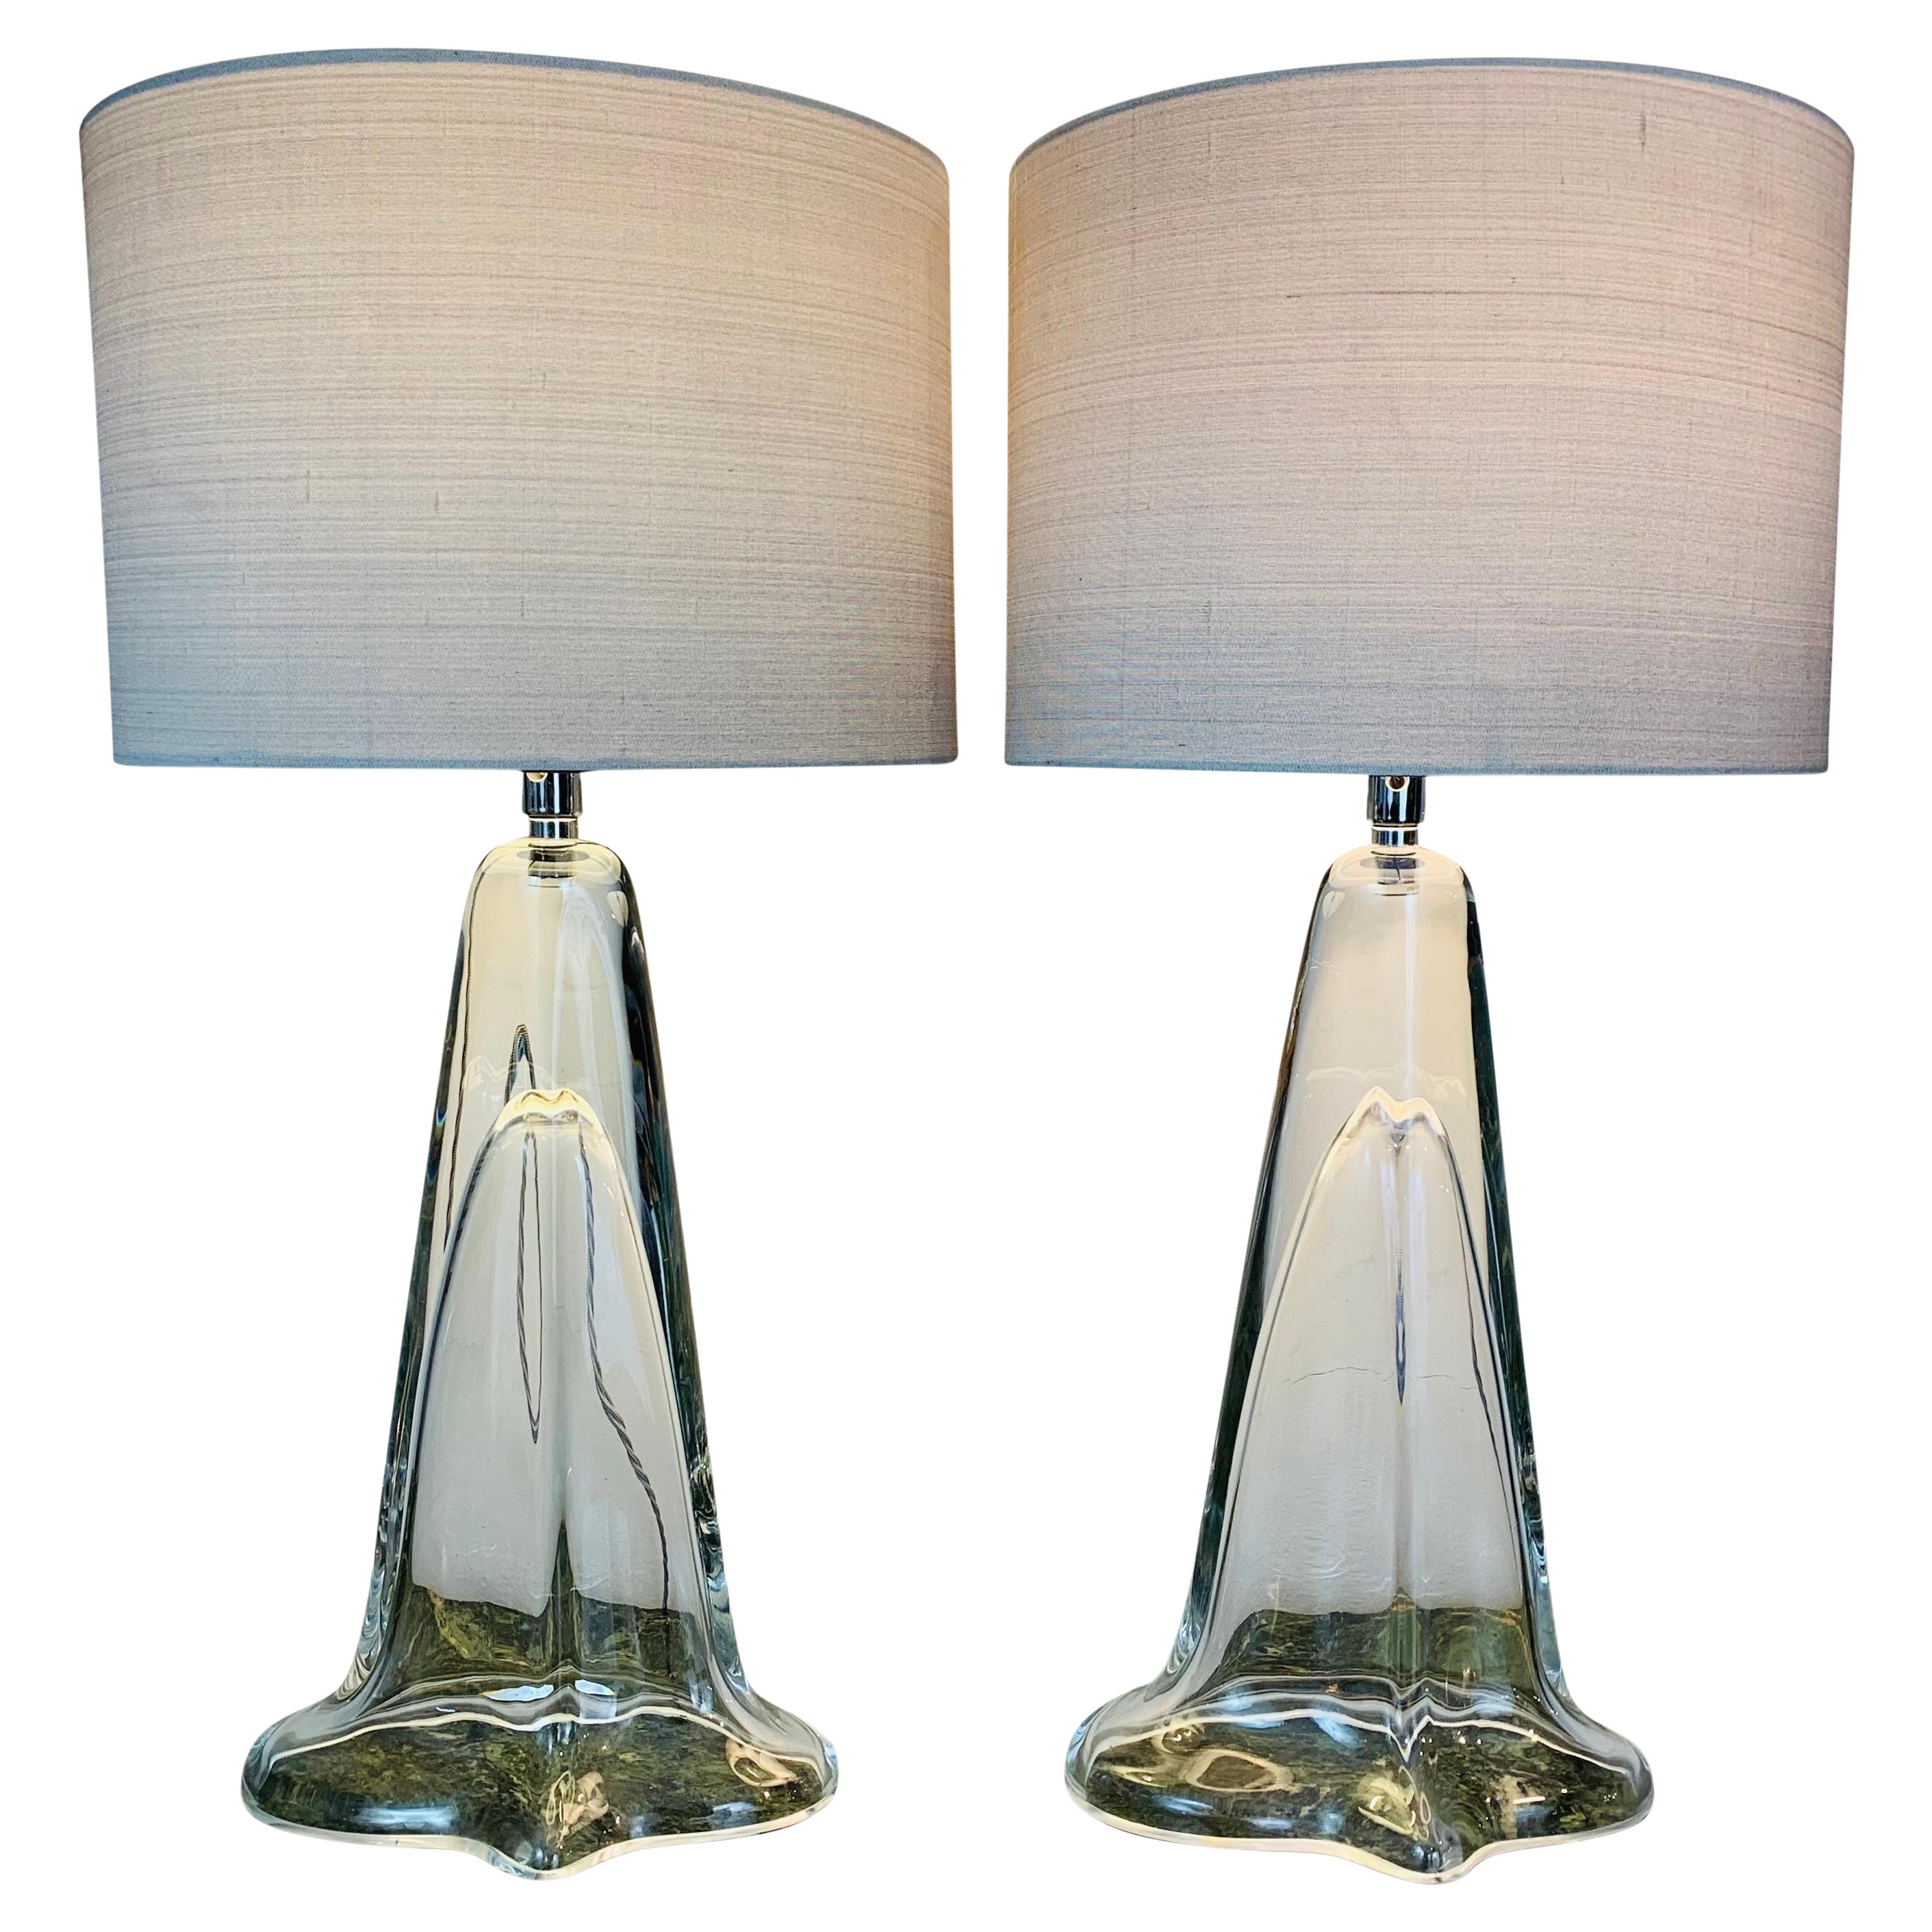 Pair of 1970s Belgium Clear Glass Tapered Oval Table Lamps with Chrome Fittings